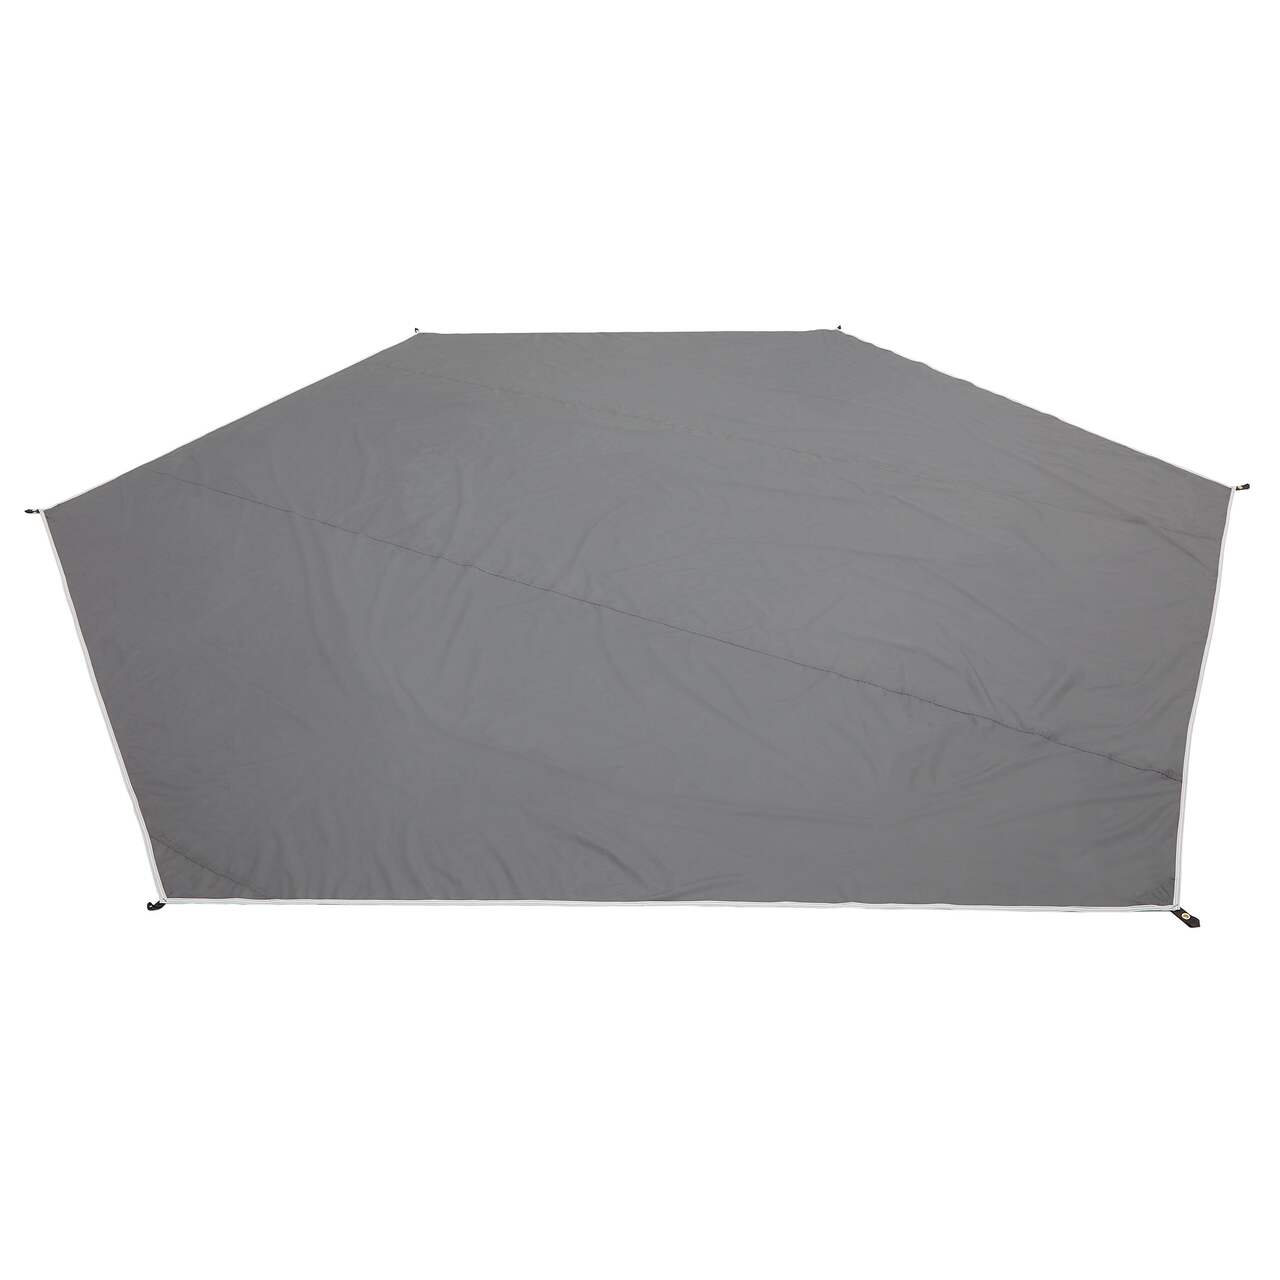 https://media-www.canadiantire.ca/product/playing/camping/tents-shelters/0766168/woods-lookout-8p-tent-footprint-863c388d-01bf-401d-b21c-aecaf9d48483-jpgrendition.jpg?imdensity=1&imwidth=640&impolicy=mZoom